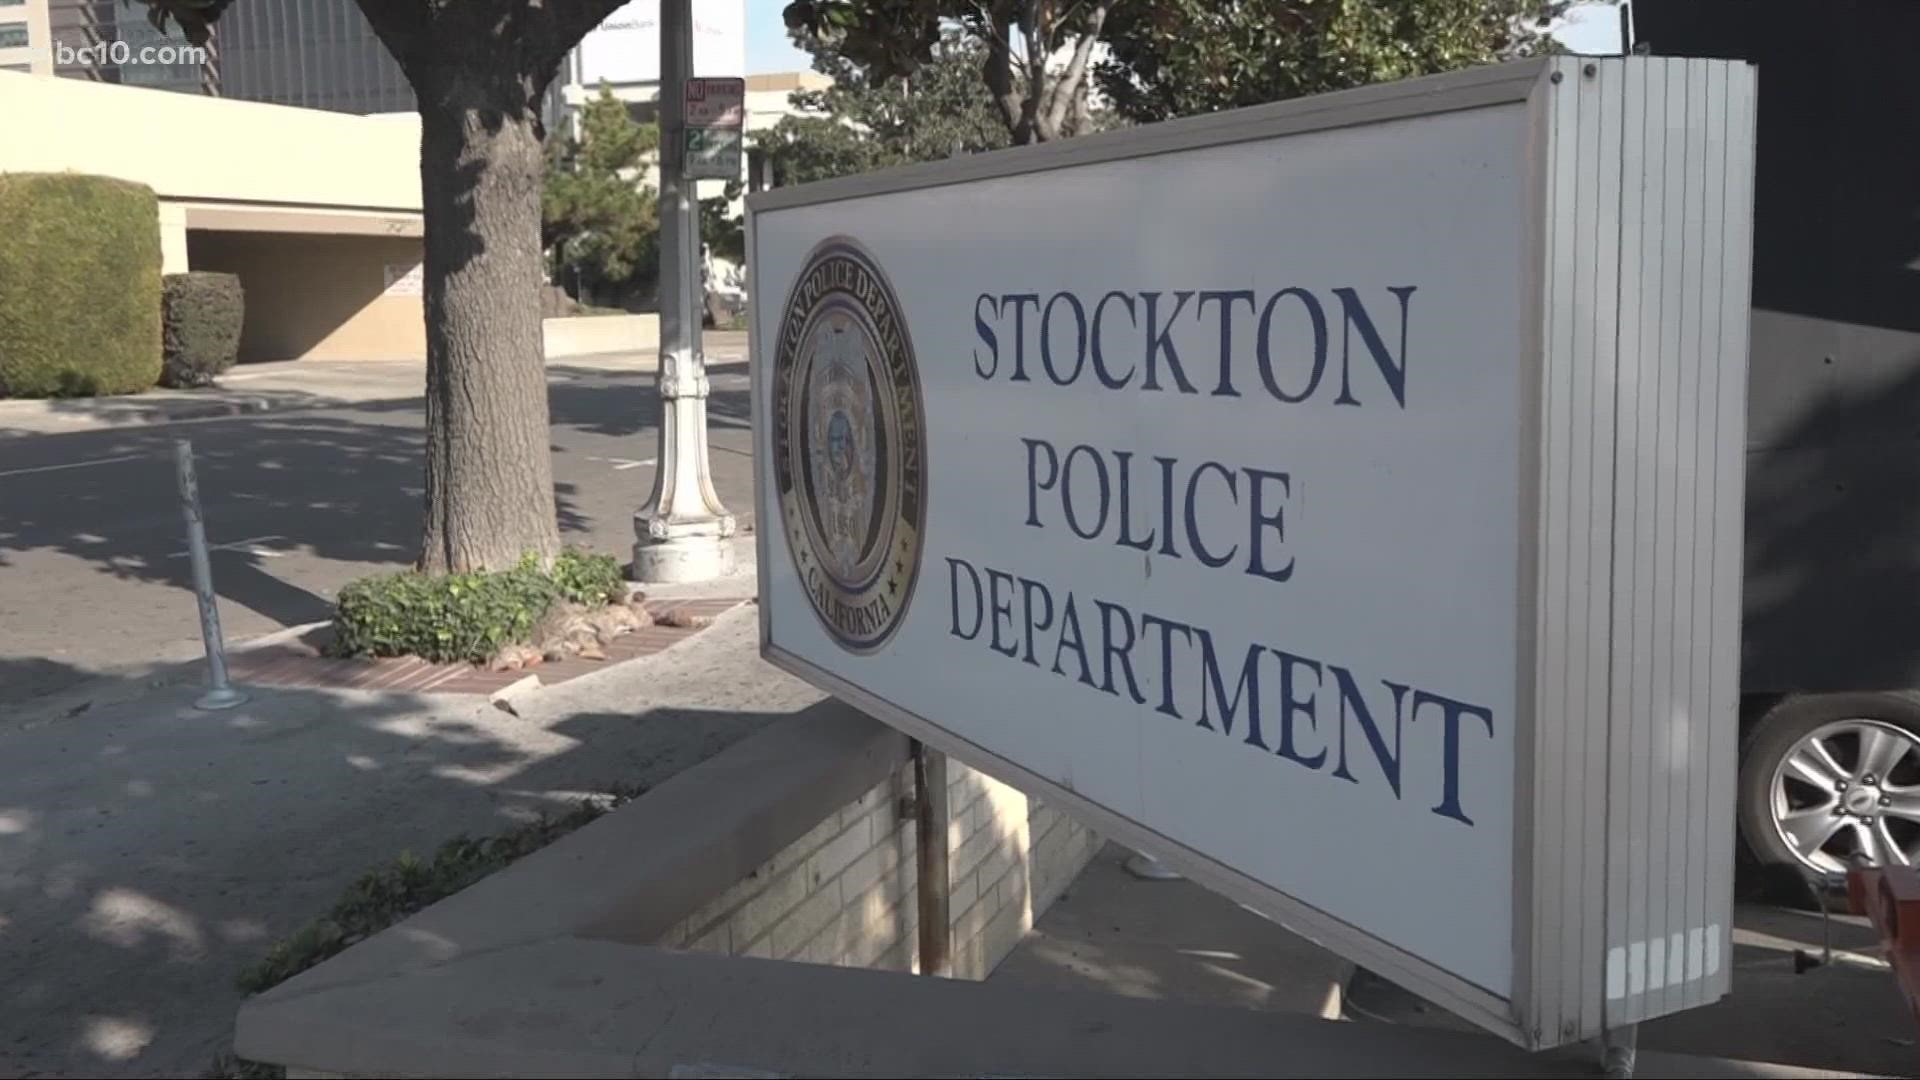 The city of Stockton is in the midst of a search for a new police chief for its 435 sworn officers after the previous chief, Eric Jones, retired at the end of 2021.